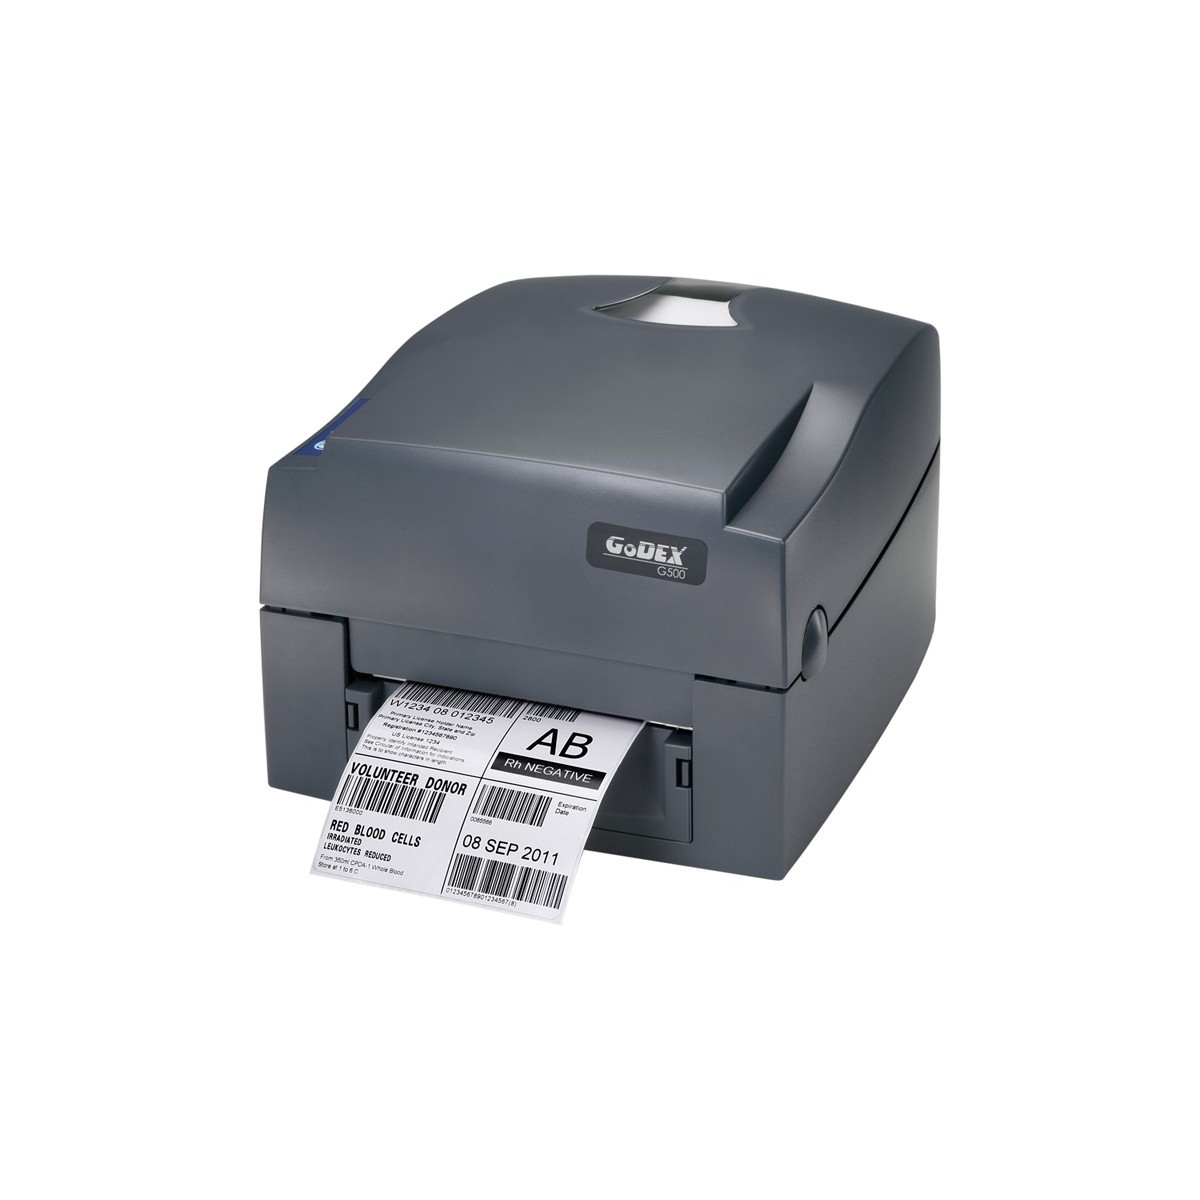 GoDEX G530 - Direct thermal - Thermal transfer - 300 x 300 DPI - 102 mm-sec - Wired - Black